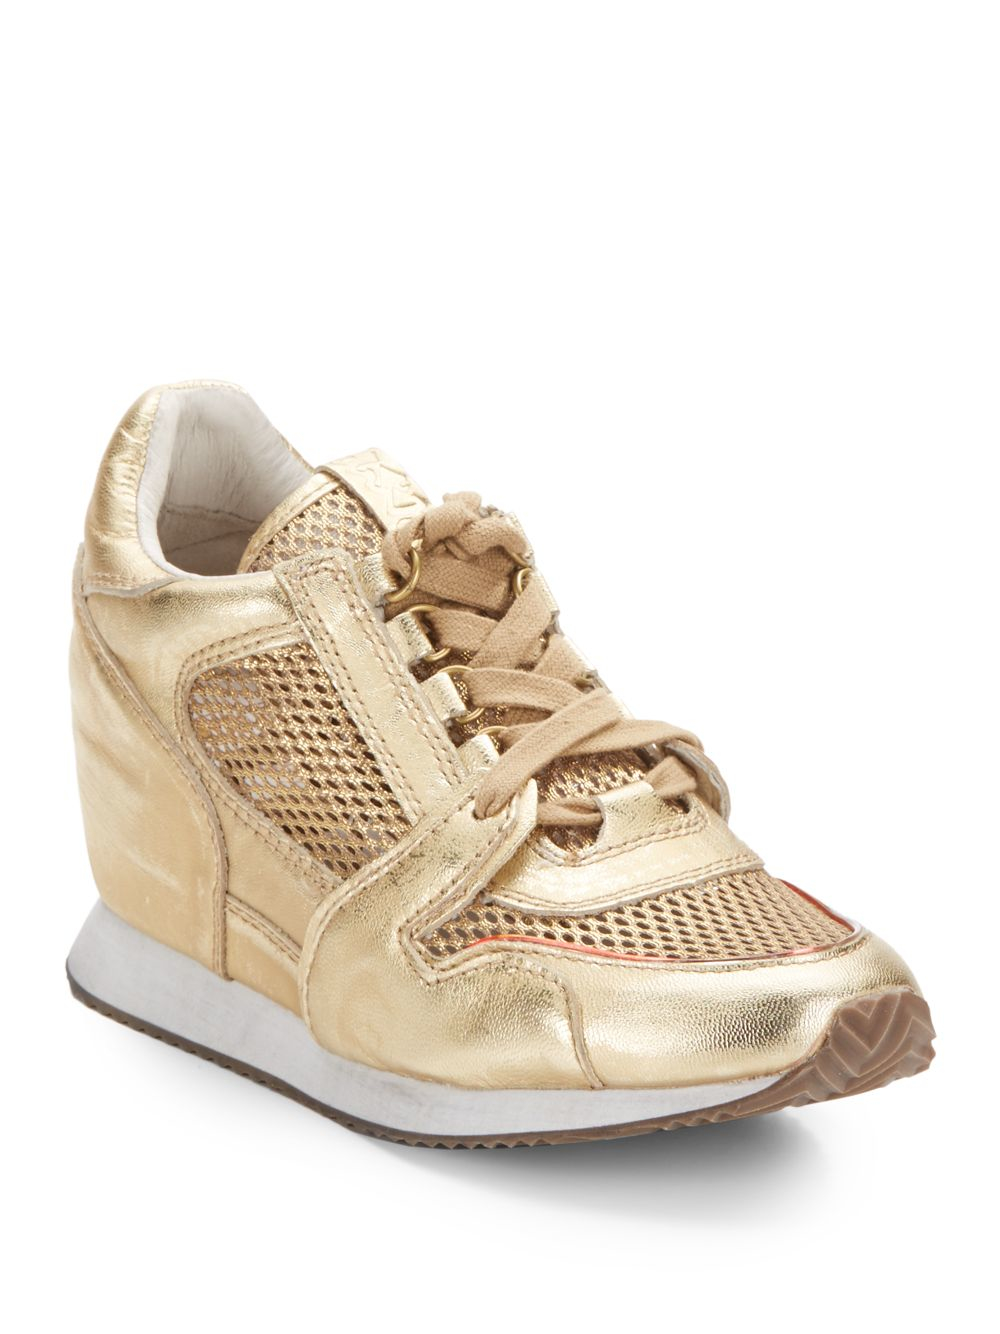 Ash Mesh Paneled-leather Wedge Sneakers in Gold (Metallic) - Lyst